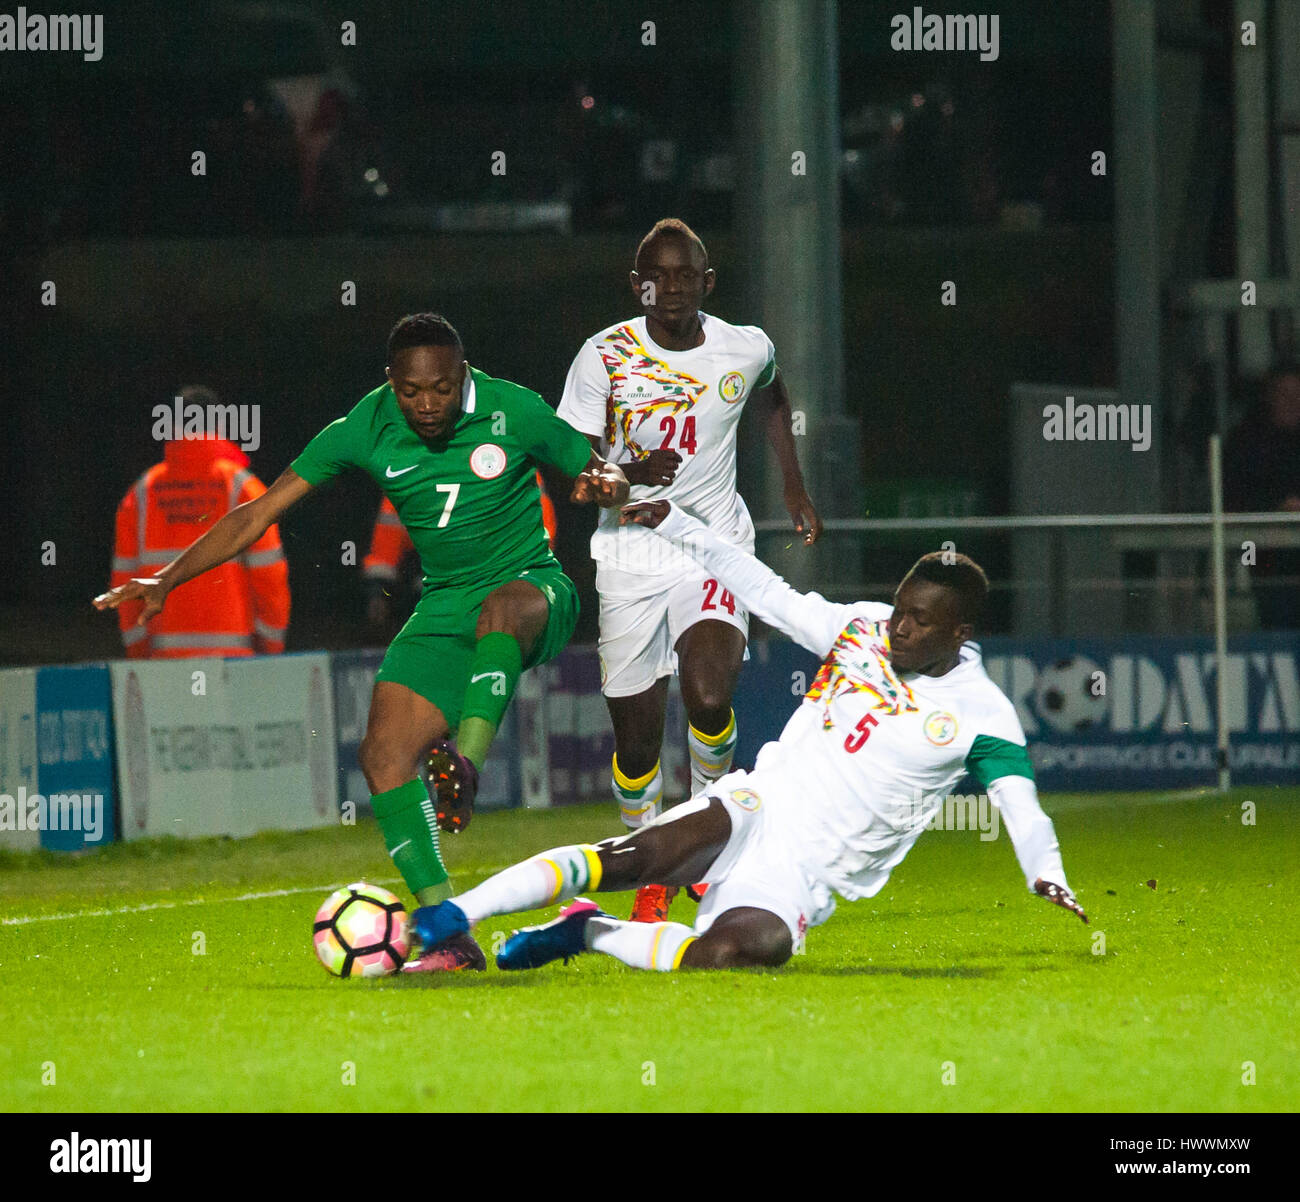 The Hive, Barnet,  England. 23rd March 2017. Ahmed Musa of Nigeria (L) battles for the ball with Adama Mbengue & Idrissa Gana Gueye of Senegal during the International Friendly match between Nigeria and Senegal. Michael Tubi / Alamy Live News Stock Photo